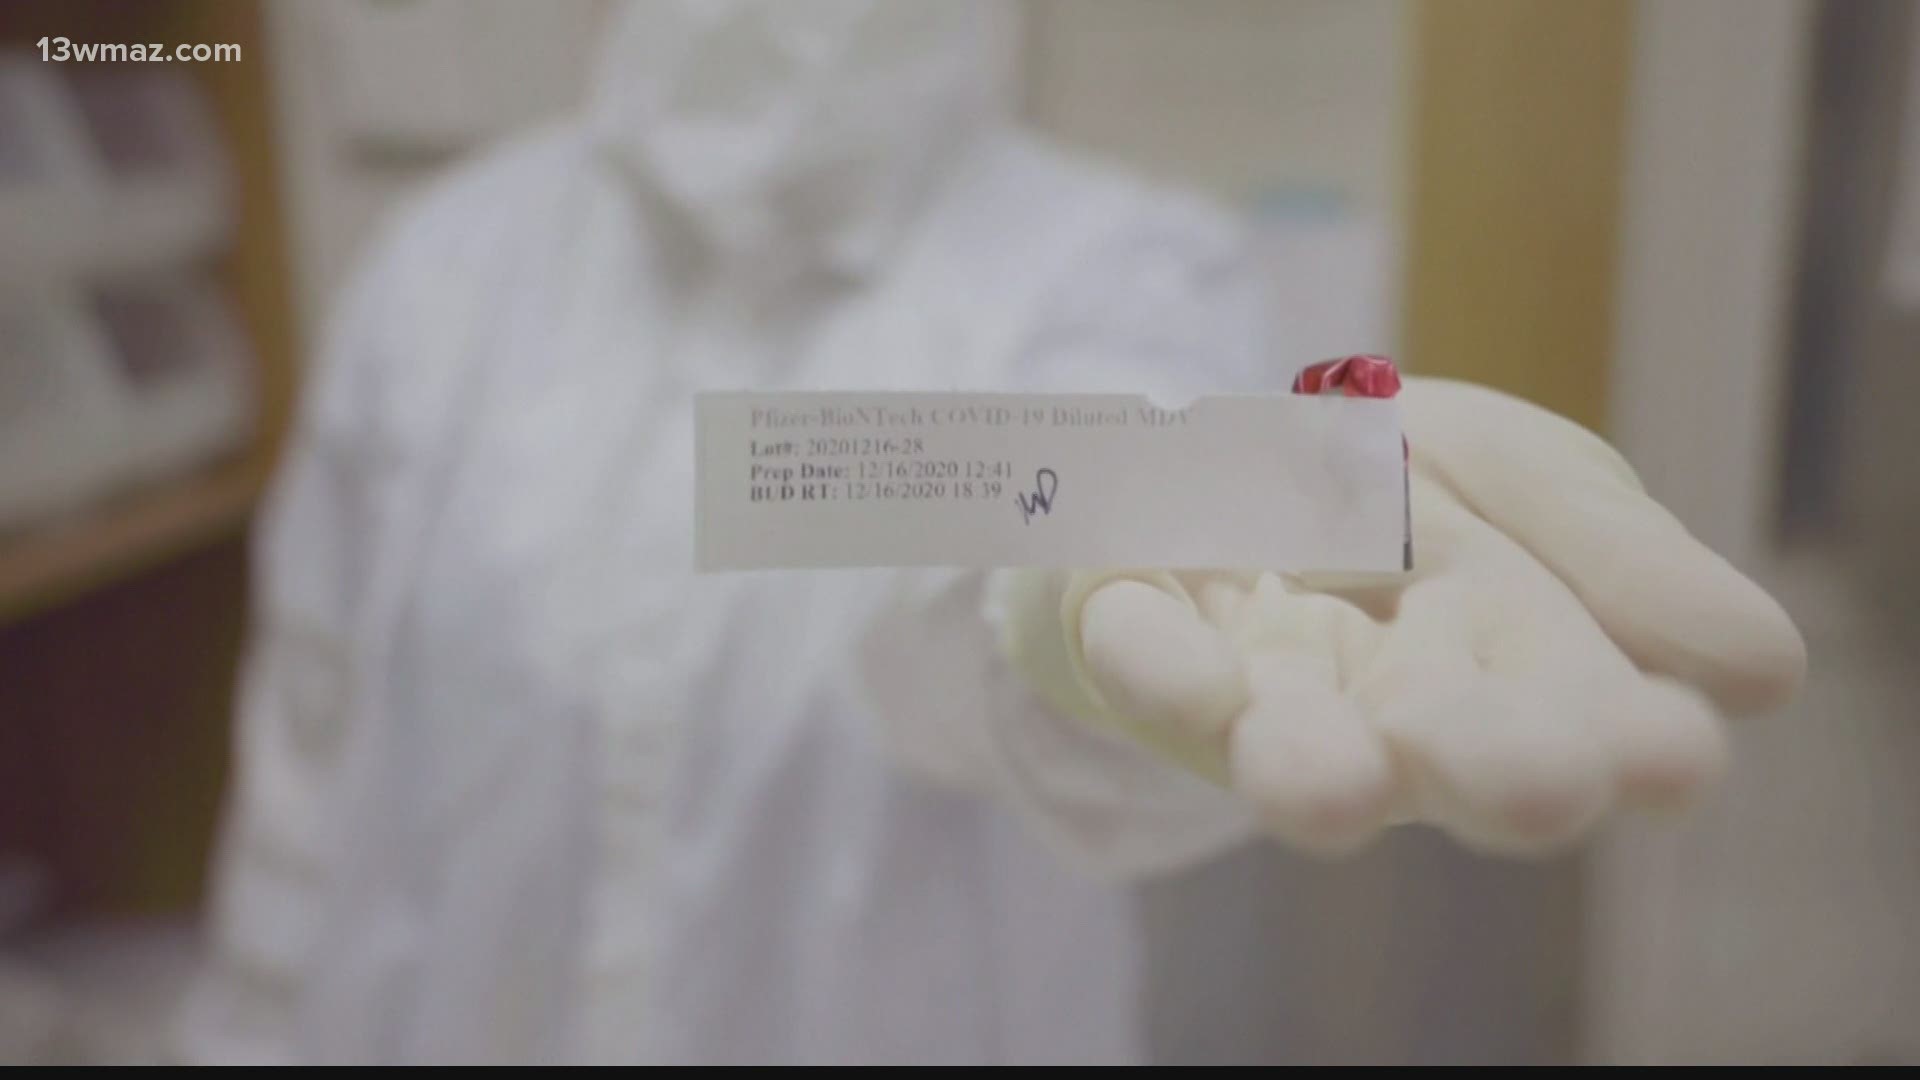 As hospitals across the state continue getting their shipments of the COVID-19 vaccine, Coliseum Health Systems announced today they will start vaccinating staff.